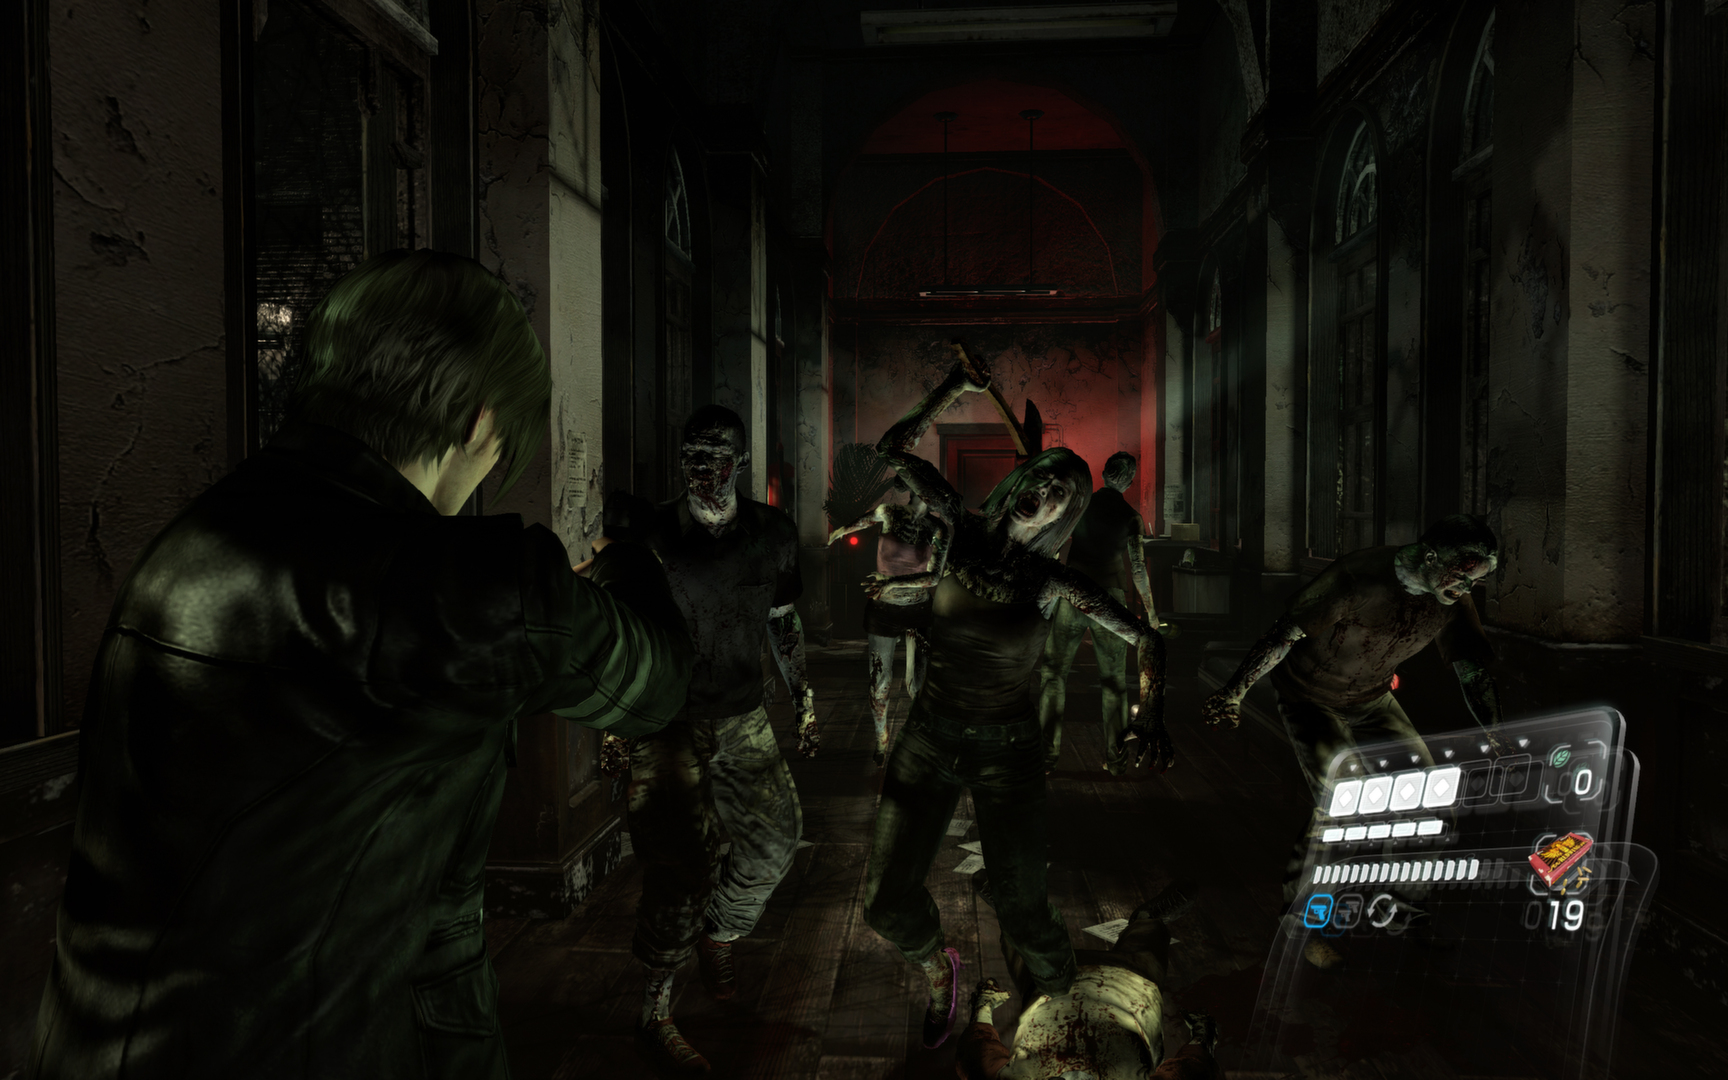 Leon S. Kennedy shoots zombies in a hallway in Resident Evil 6.